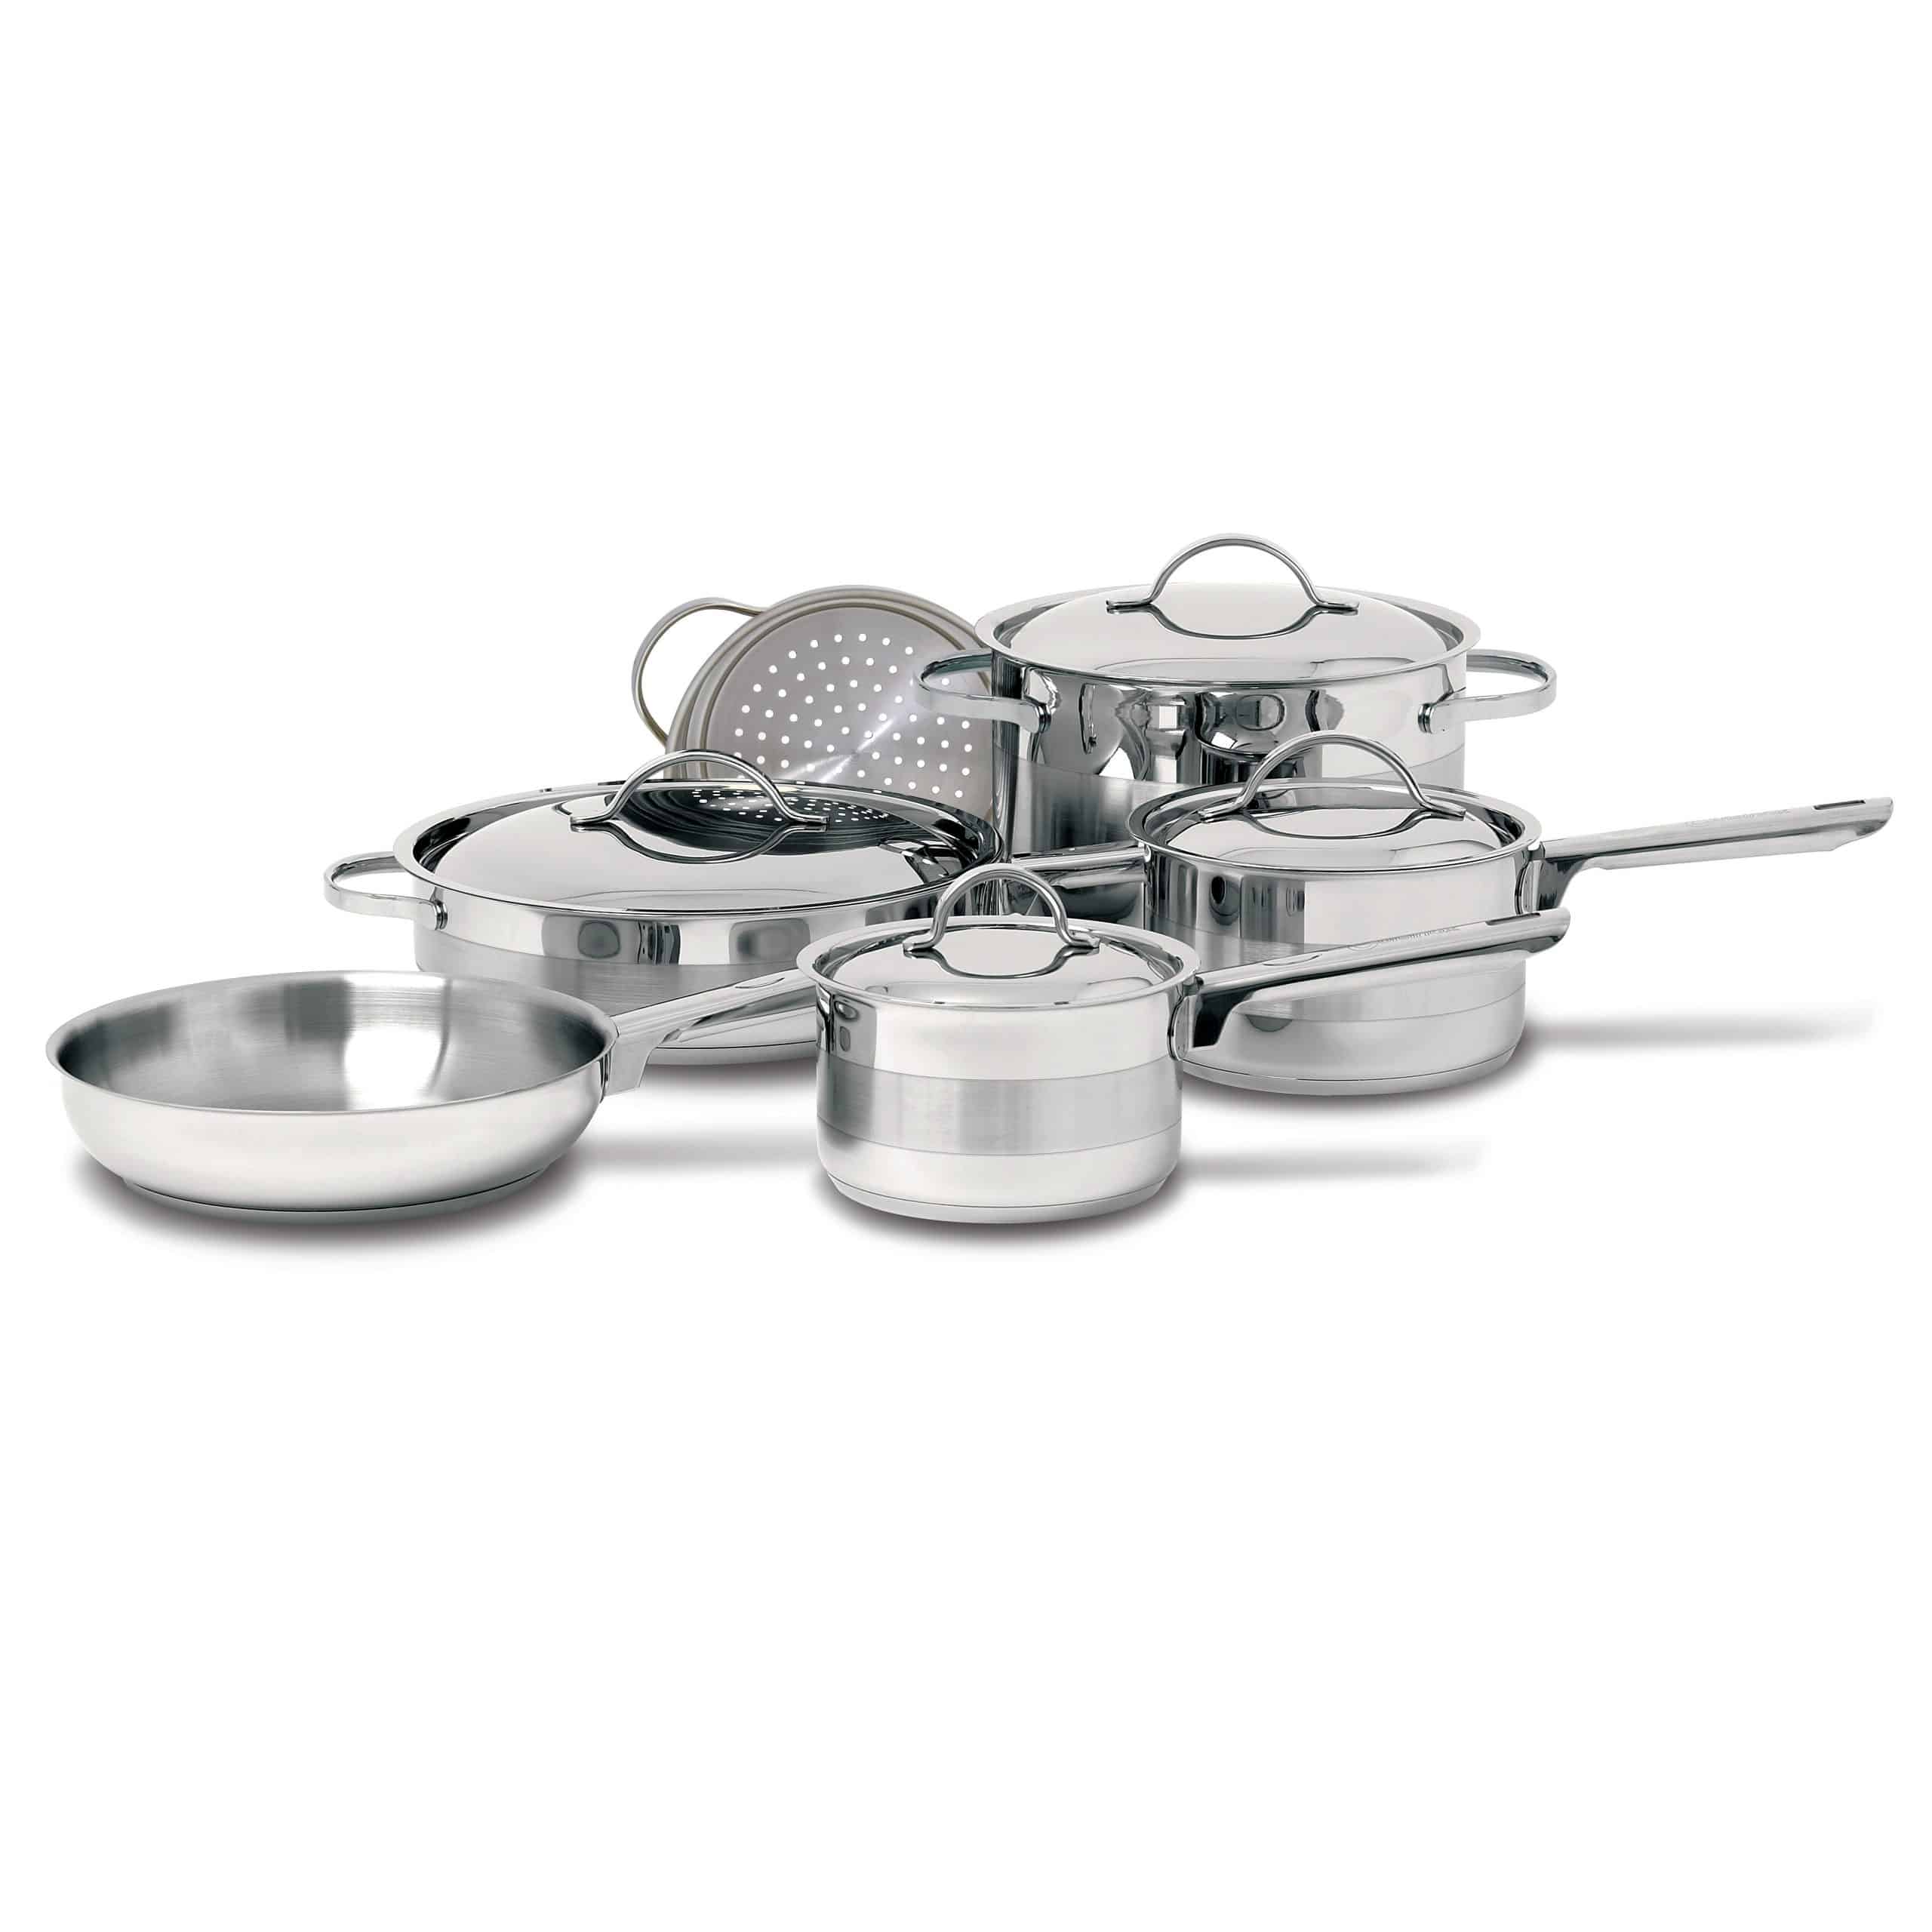 12 Piece Stainless Steel 18/10 Pots & Pans Cooking Set Nuwave Induction blk 